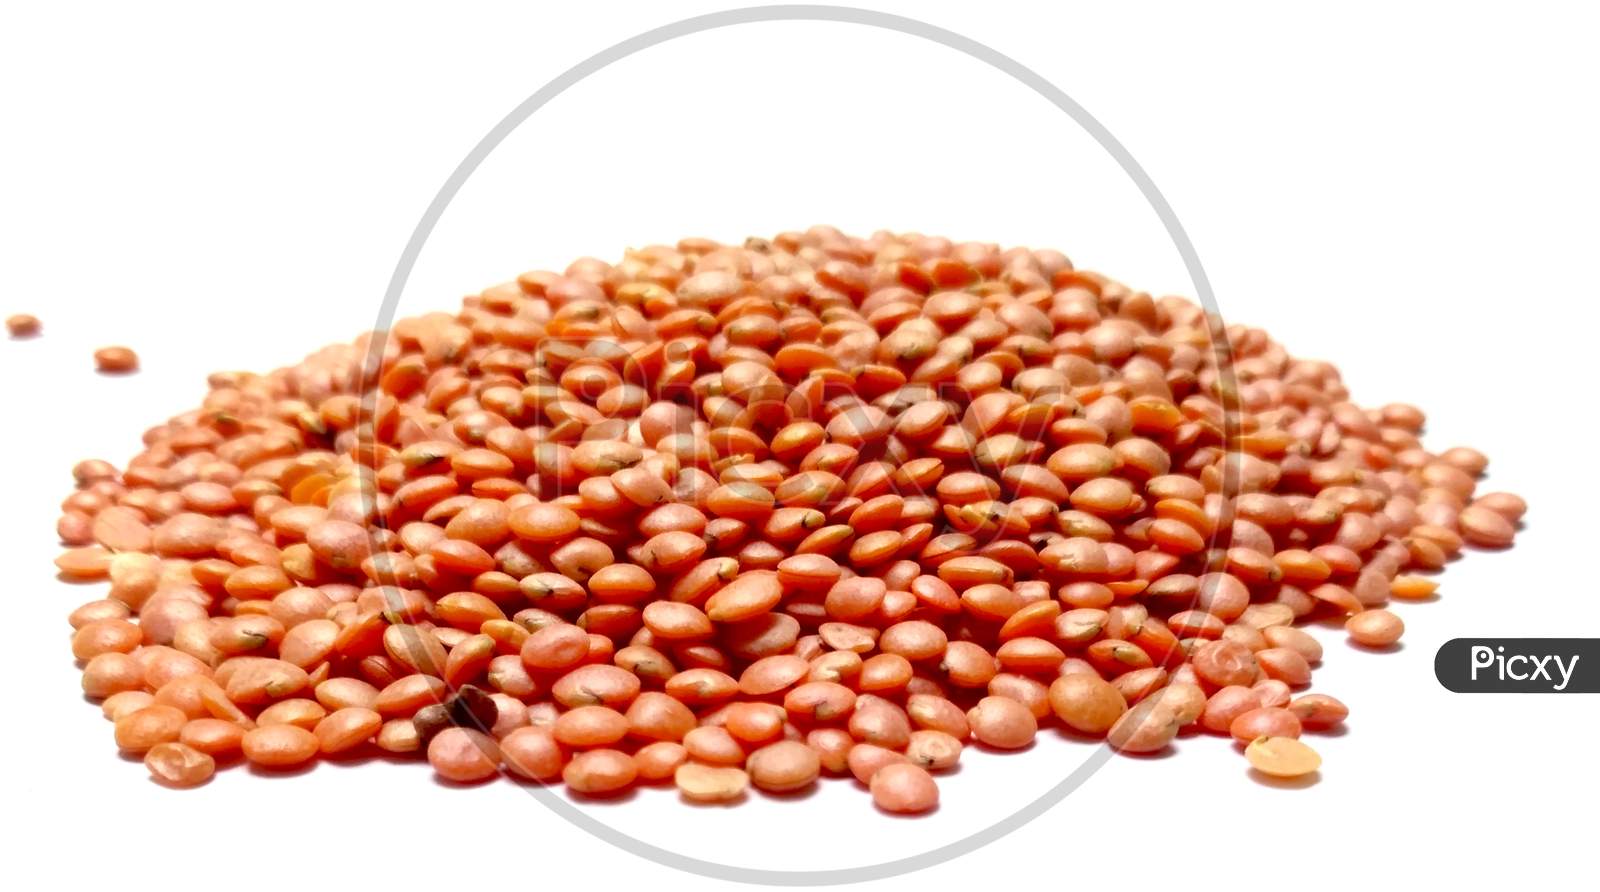 Red Lentils Or Masoor Dal Isolated On White Background